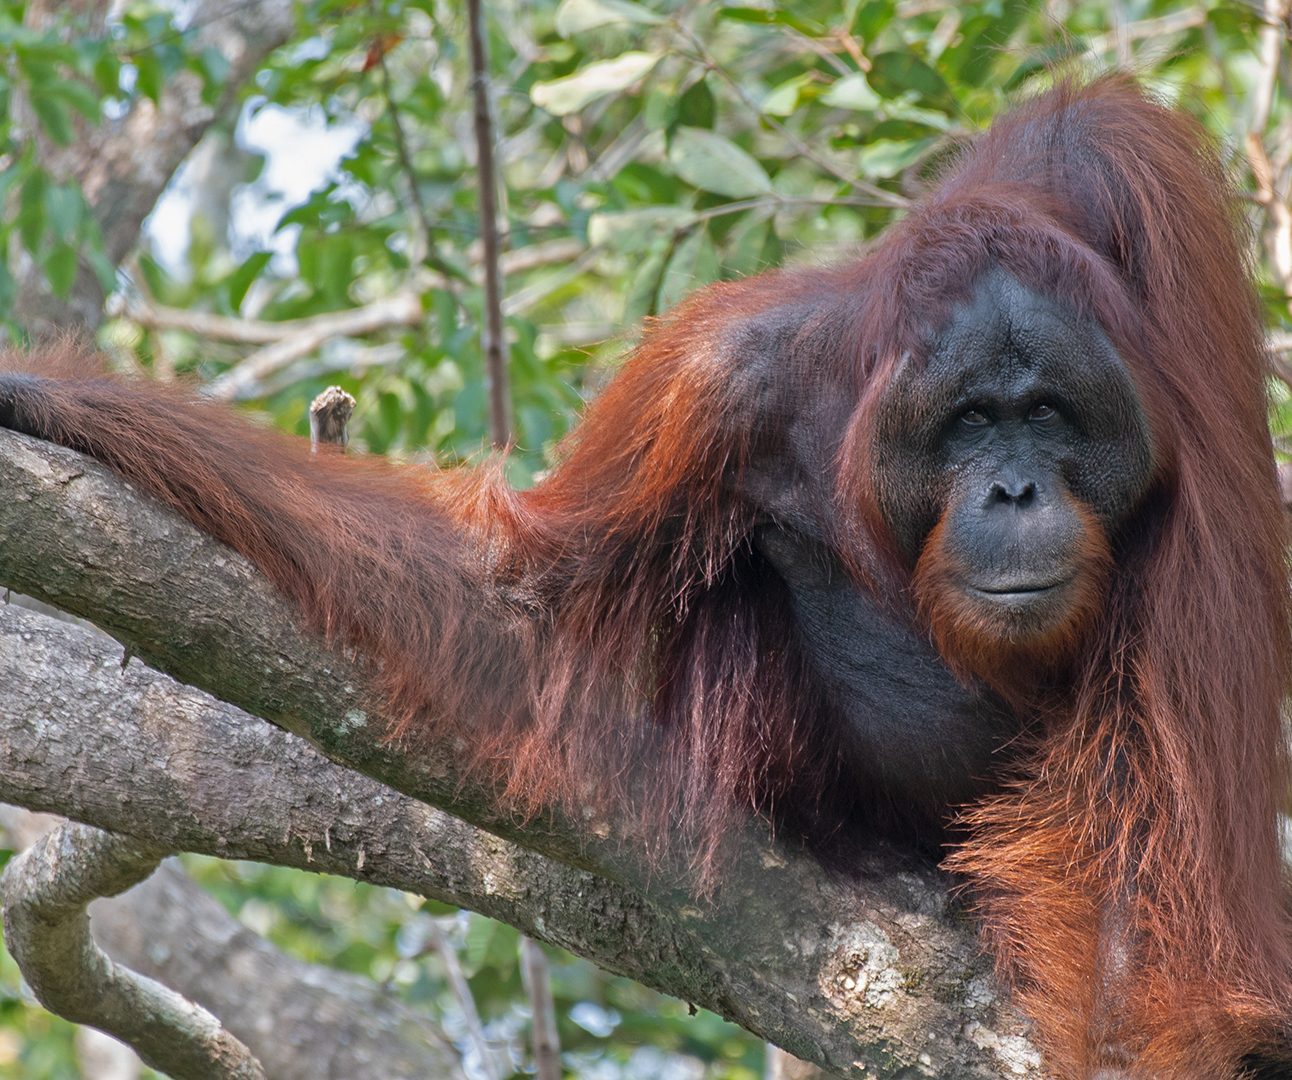 An adult orangutan sits on a tree branch with one arm outstretched